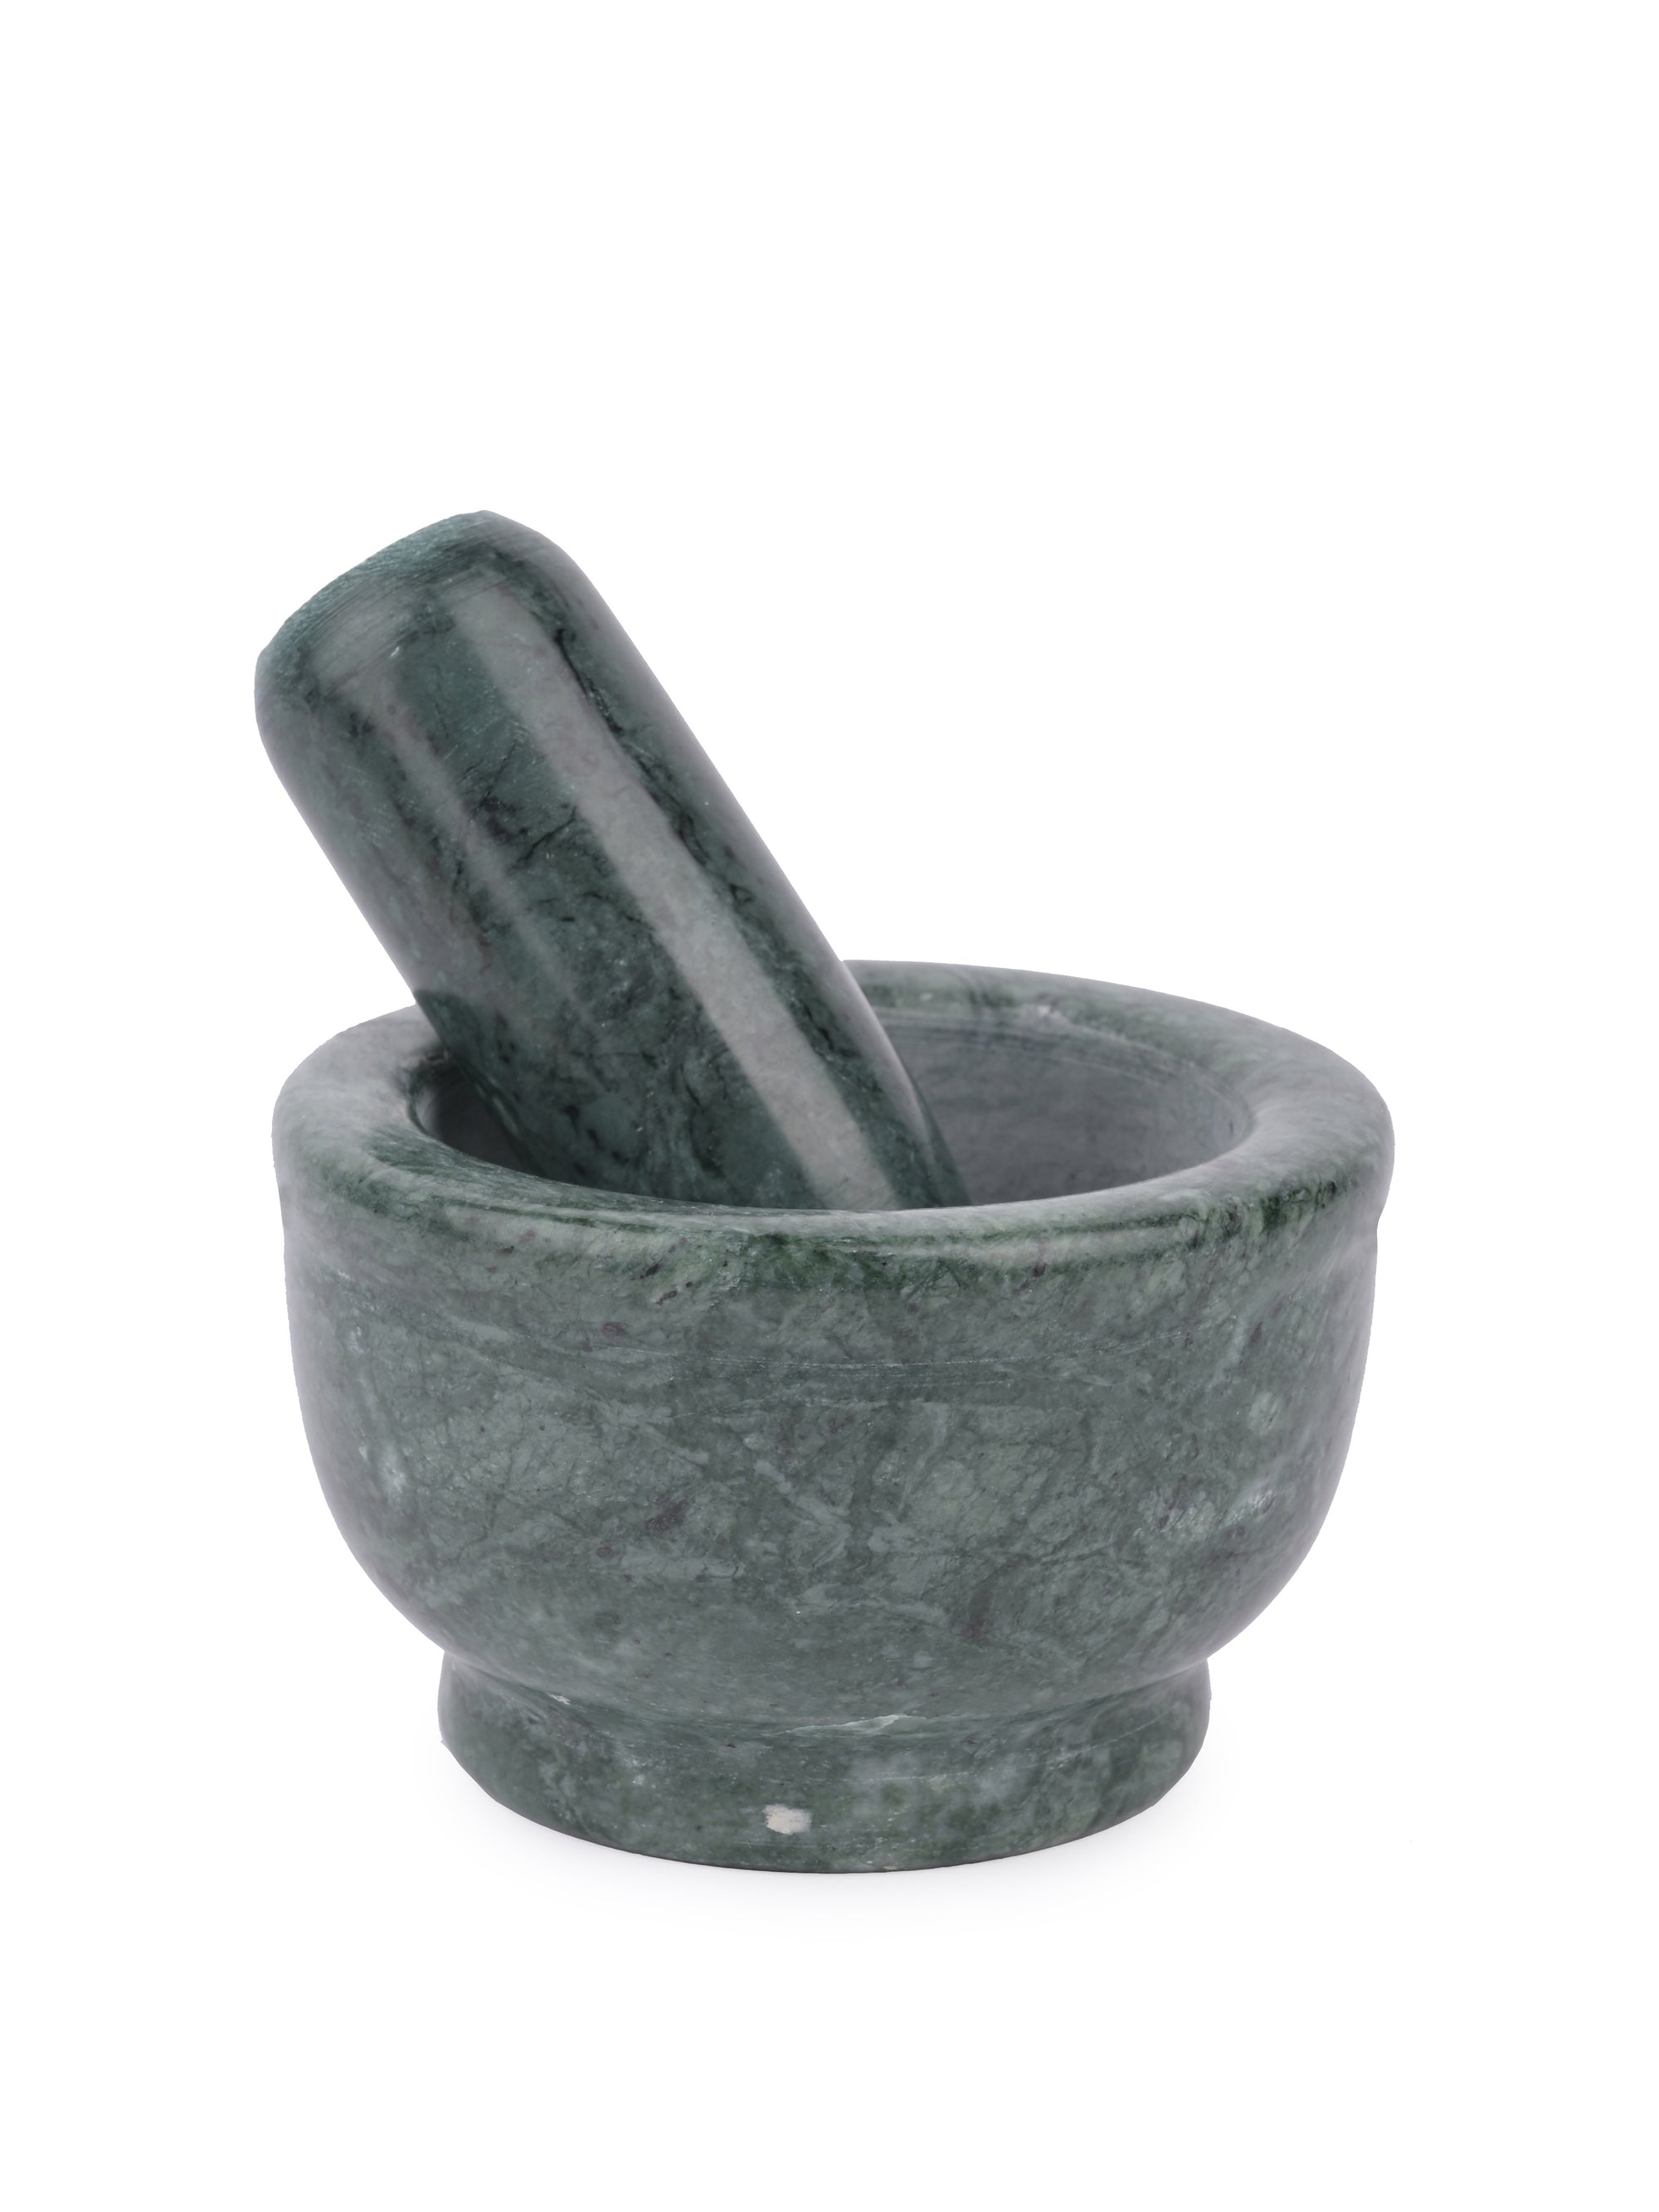 Mortar and Pestle set / Okhli Musal in Green marble - The Heritage Artifacts